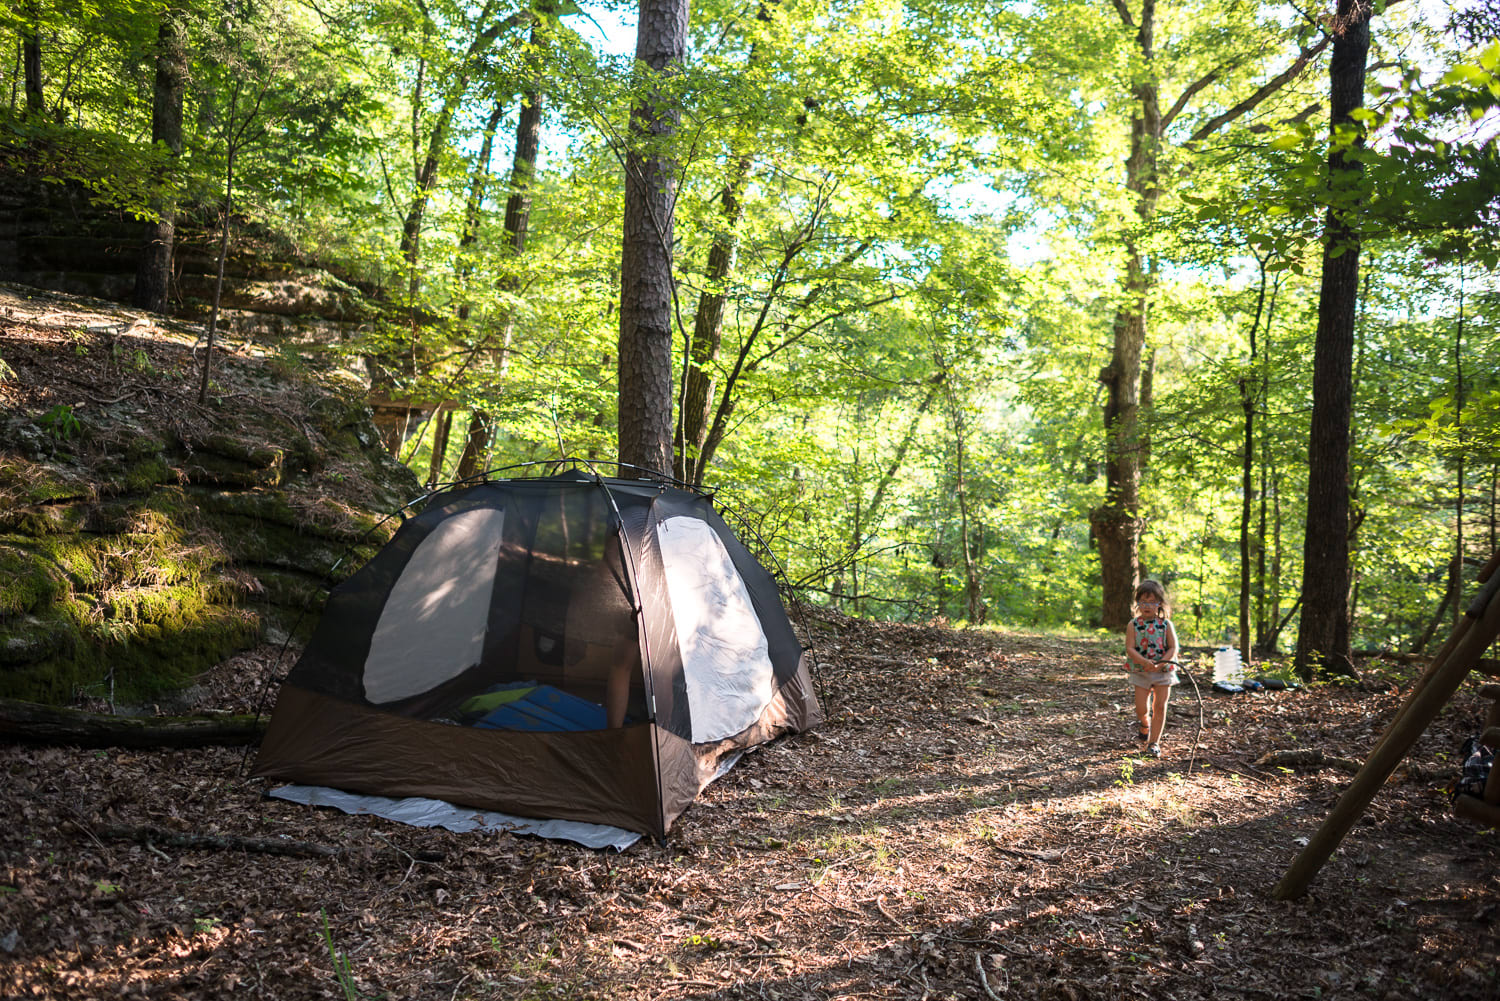 Our camp next to the bluffs in the Eureka Springs woods.